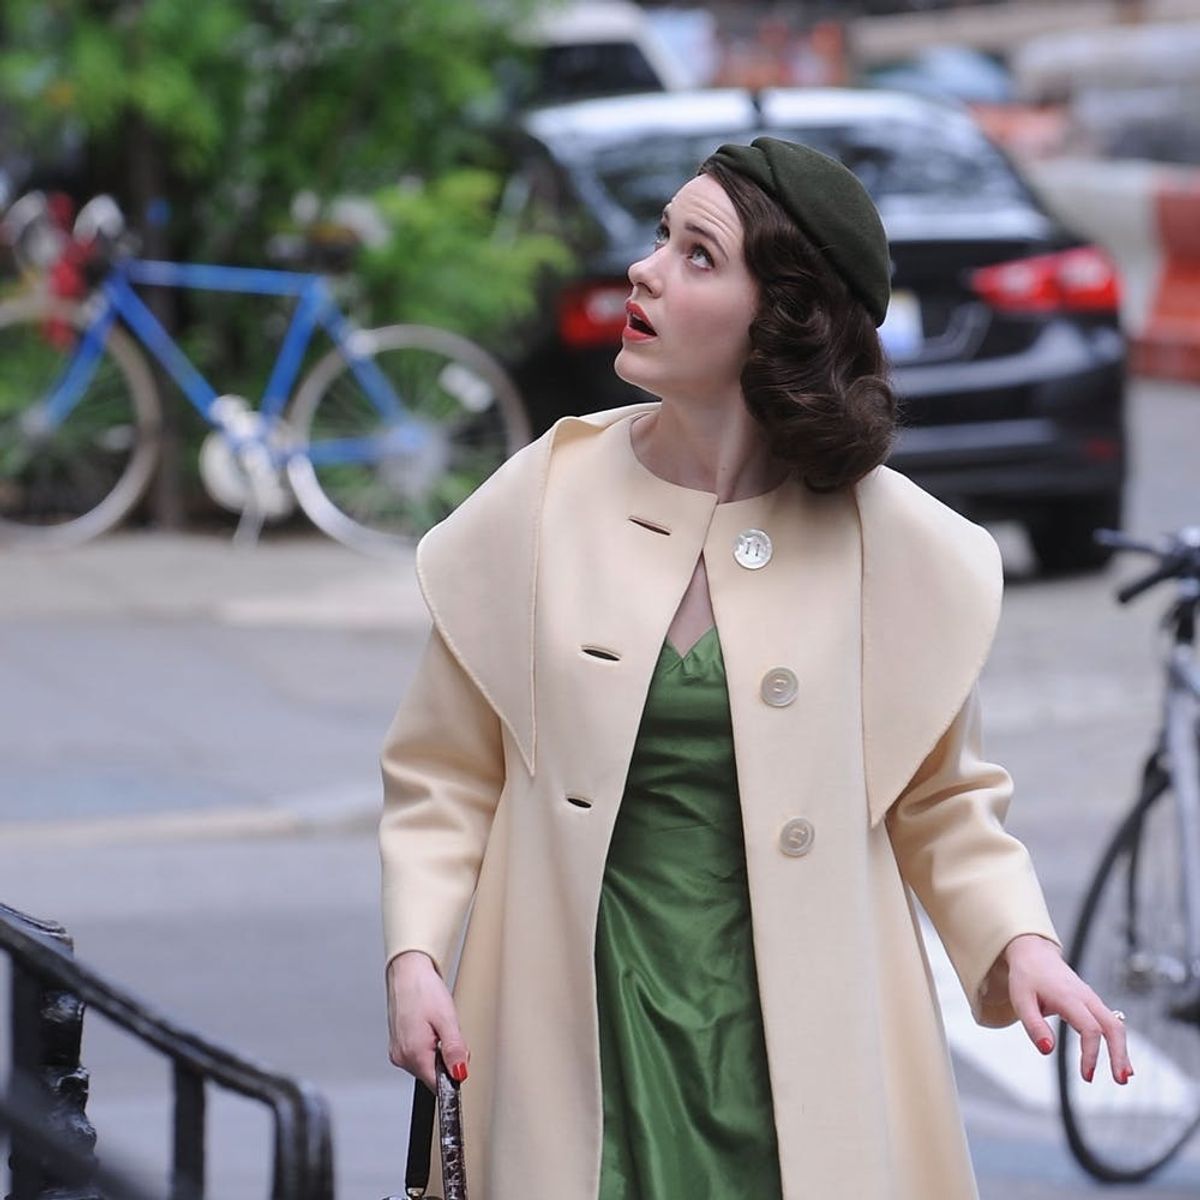 “Gilmore Girls” Creator’s Hilarious New Show “The Marvelous Mrs. Maisel” Finally Has a Trailer and Premiere Date!